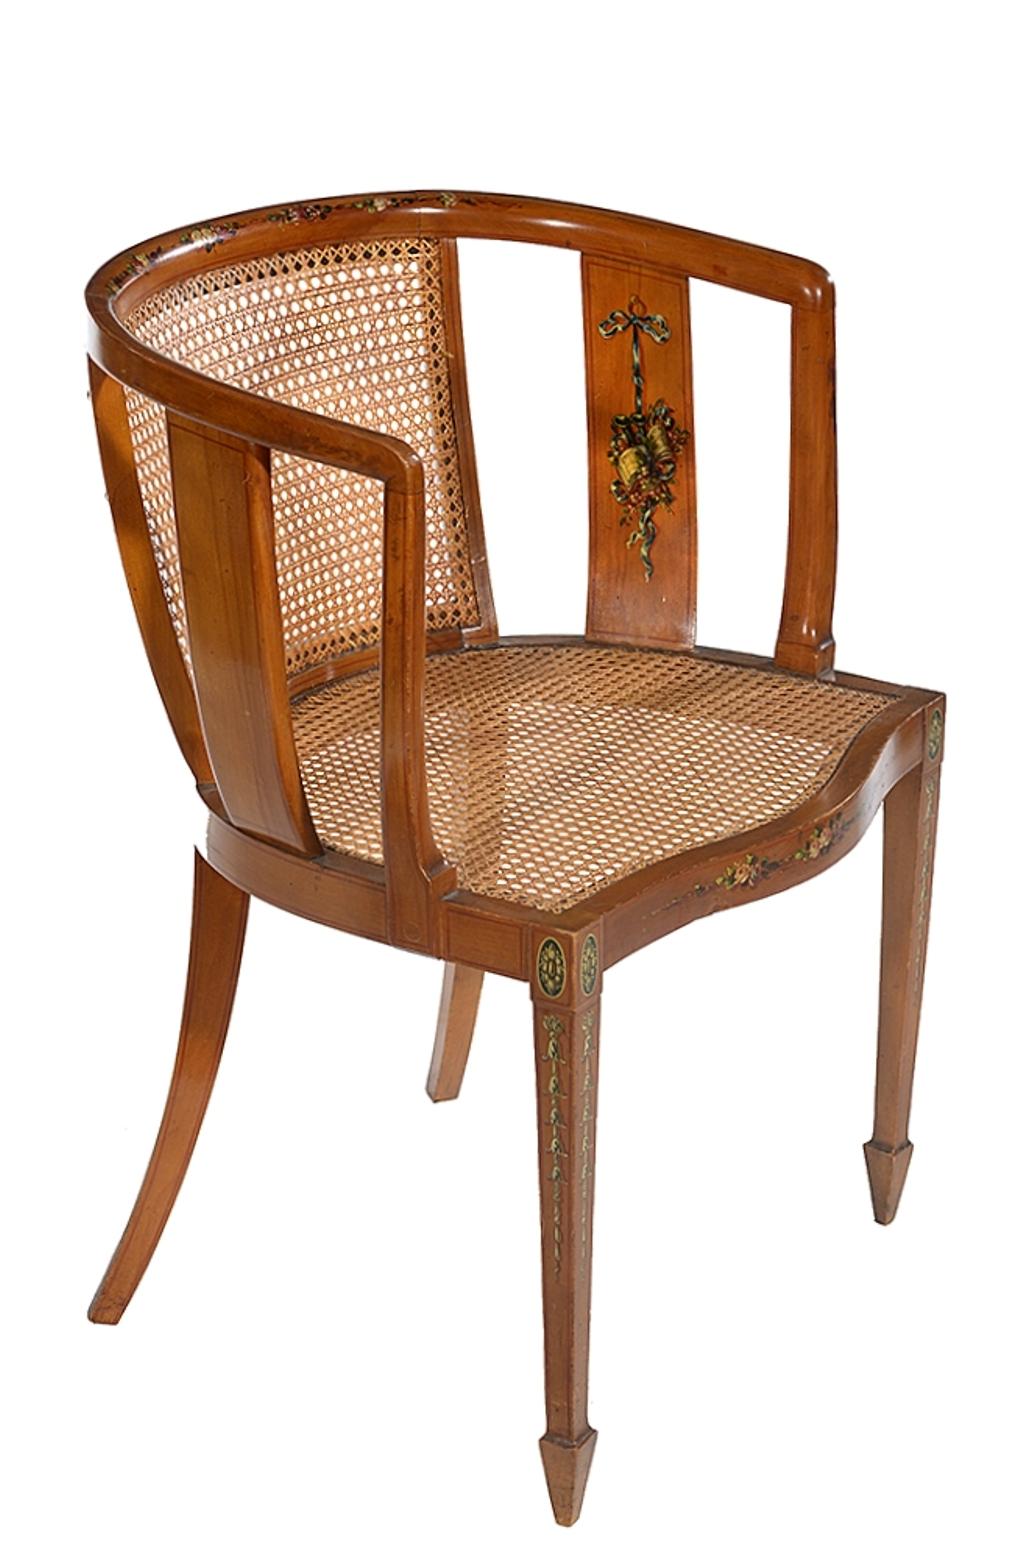 Sheraton Style Satinwood Chair with Painted Decoration For Sale 1